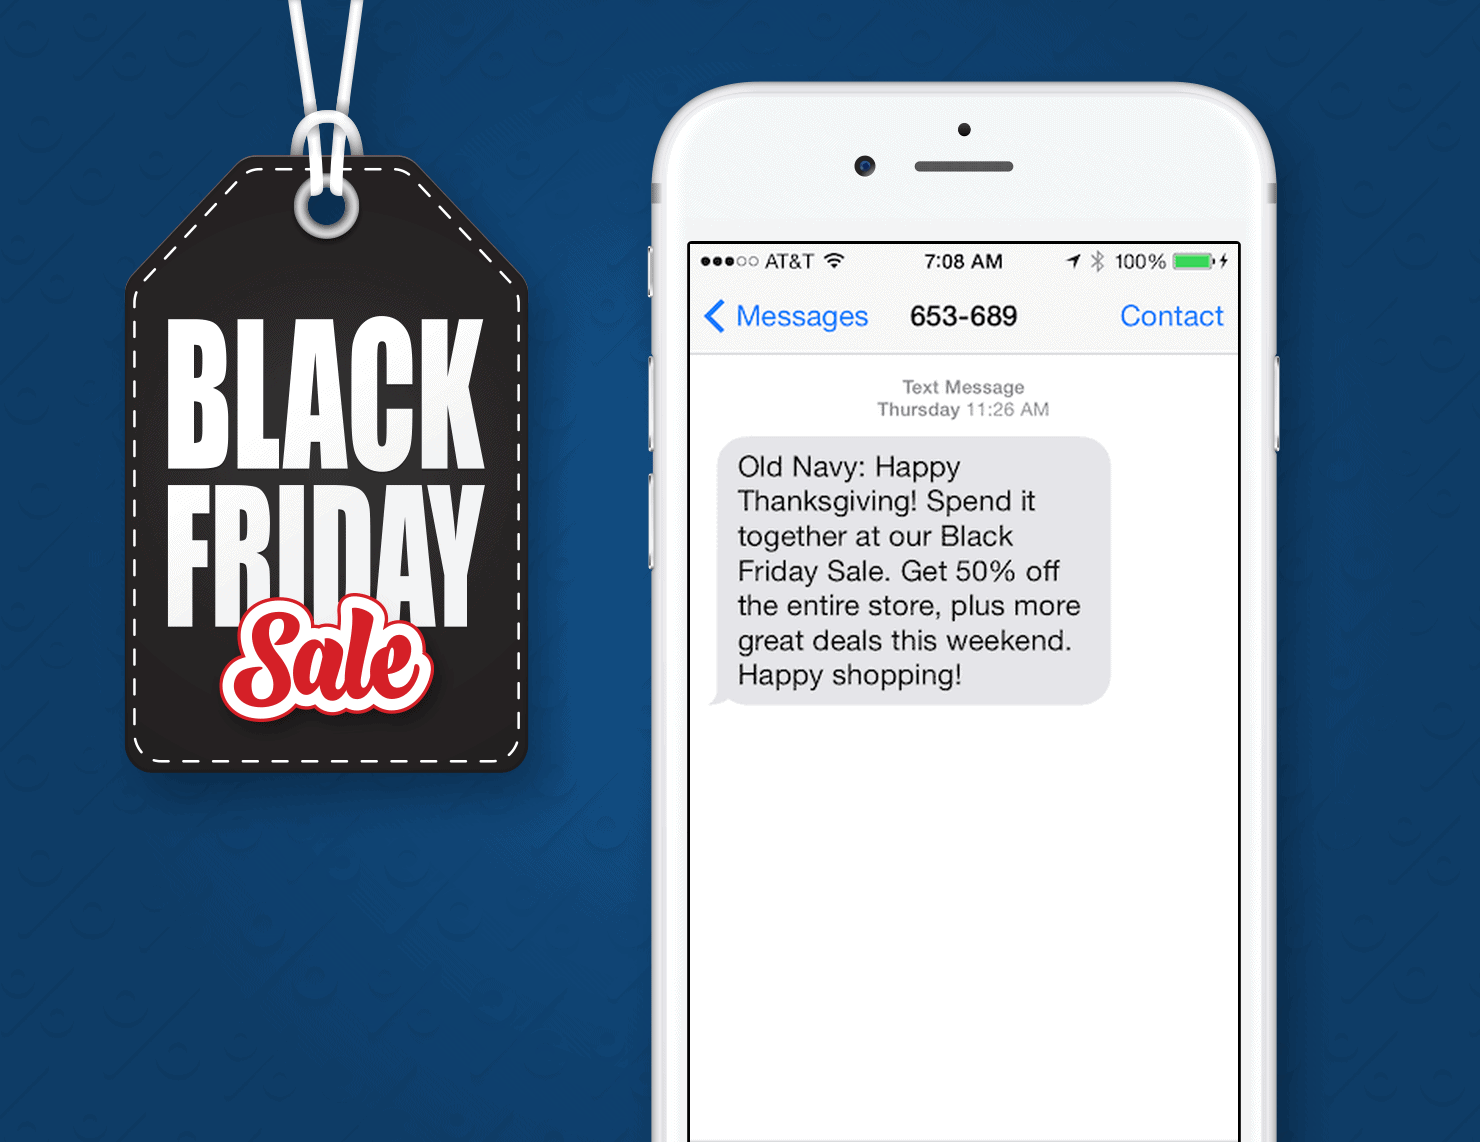 Black Friday SMS Marketing Example From Old Navy